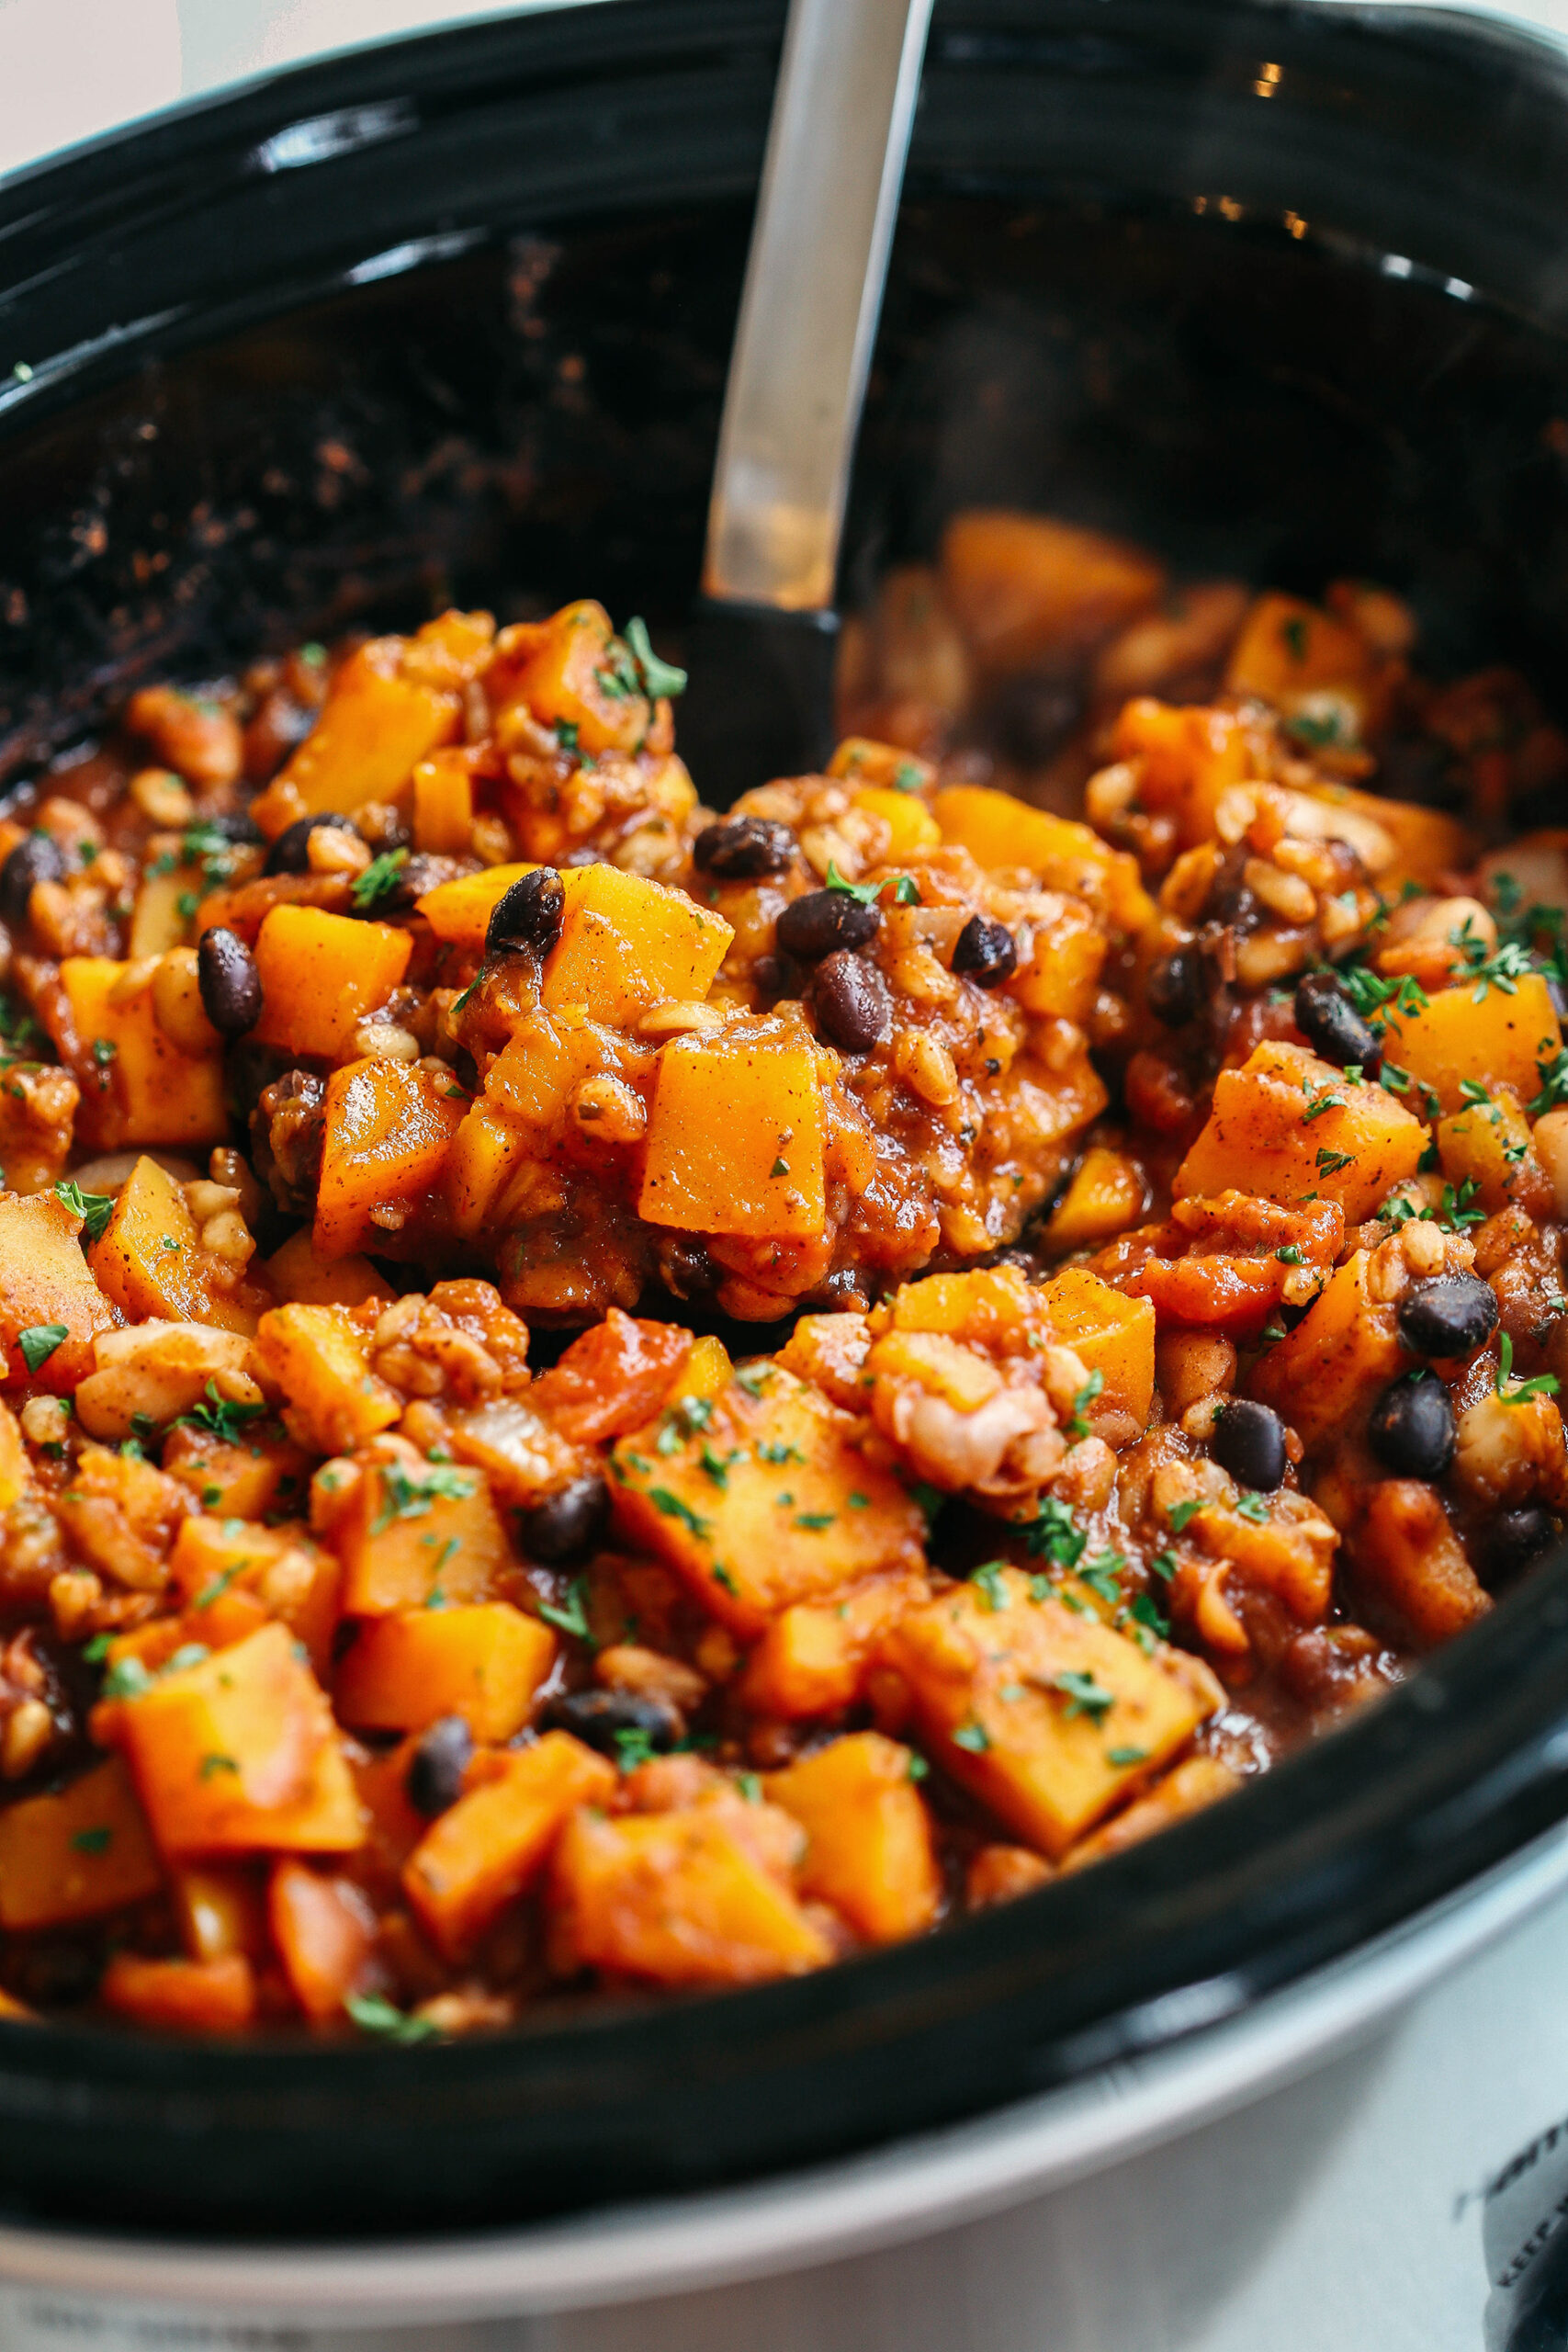 This Slow Cooker Butternut Squash and Farro Chili is hearty, healthy and loaded with seasonal veggies, tender farro, protein-packed beans, and cozy spices all simmered together in a delicious broth for the perfect fall meal!